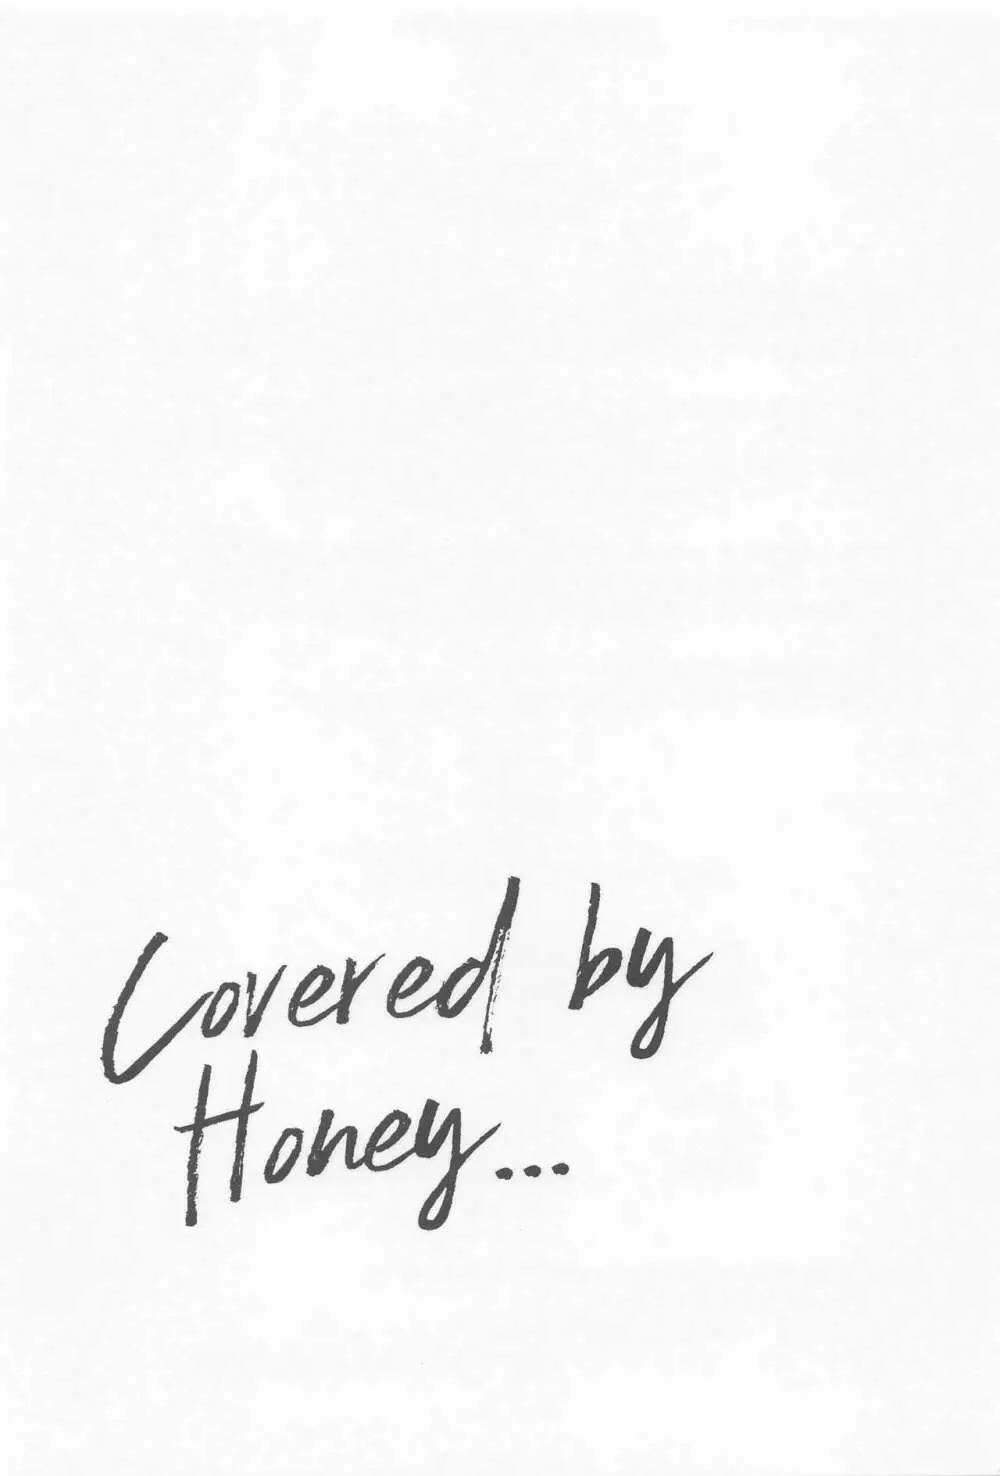 Covered by Honey... Page.28